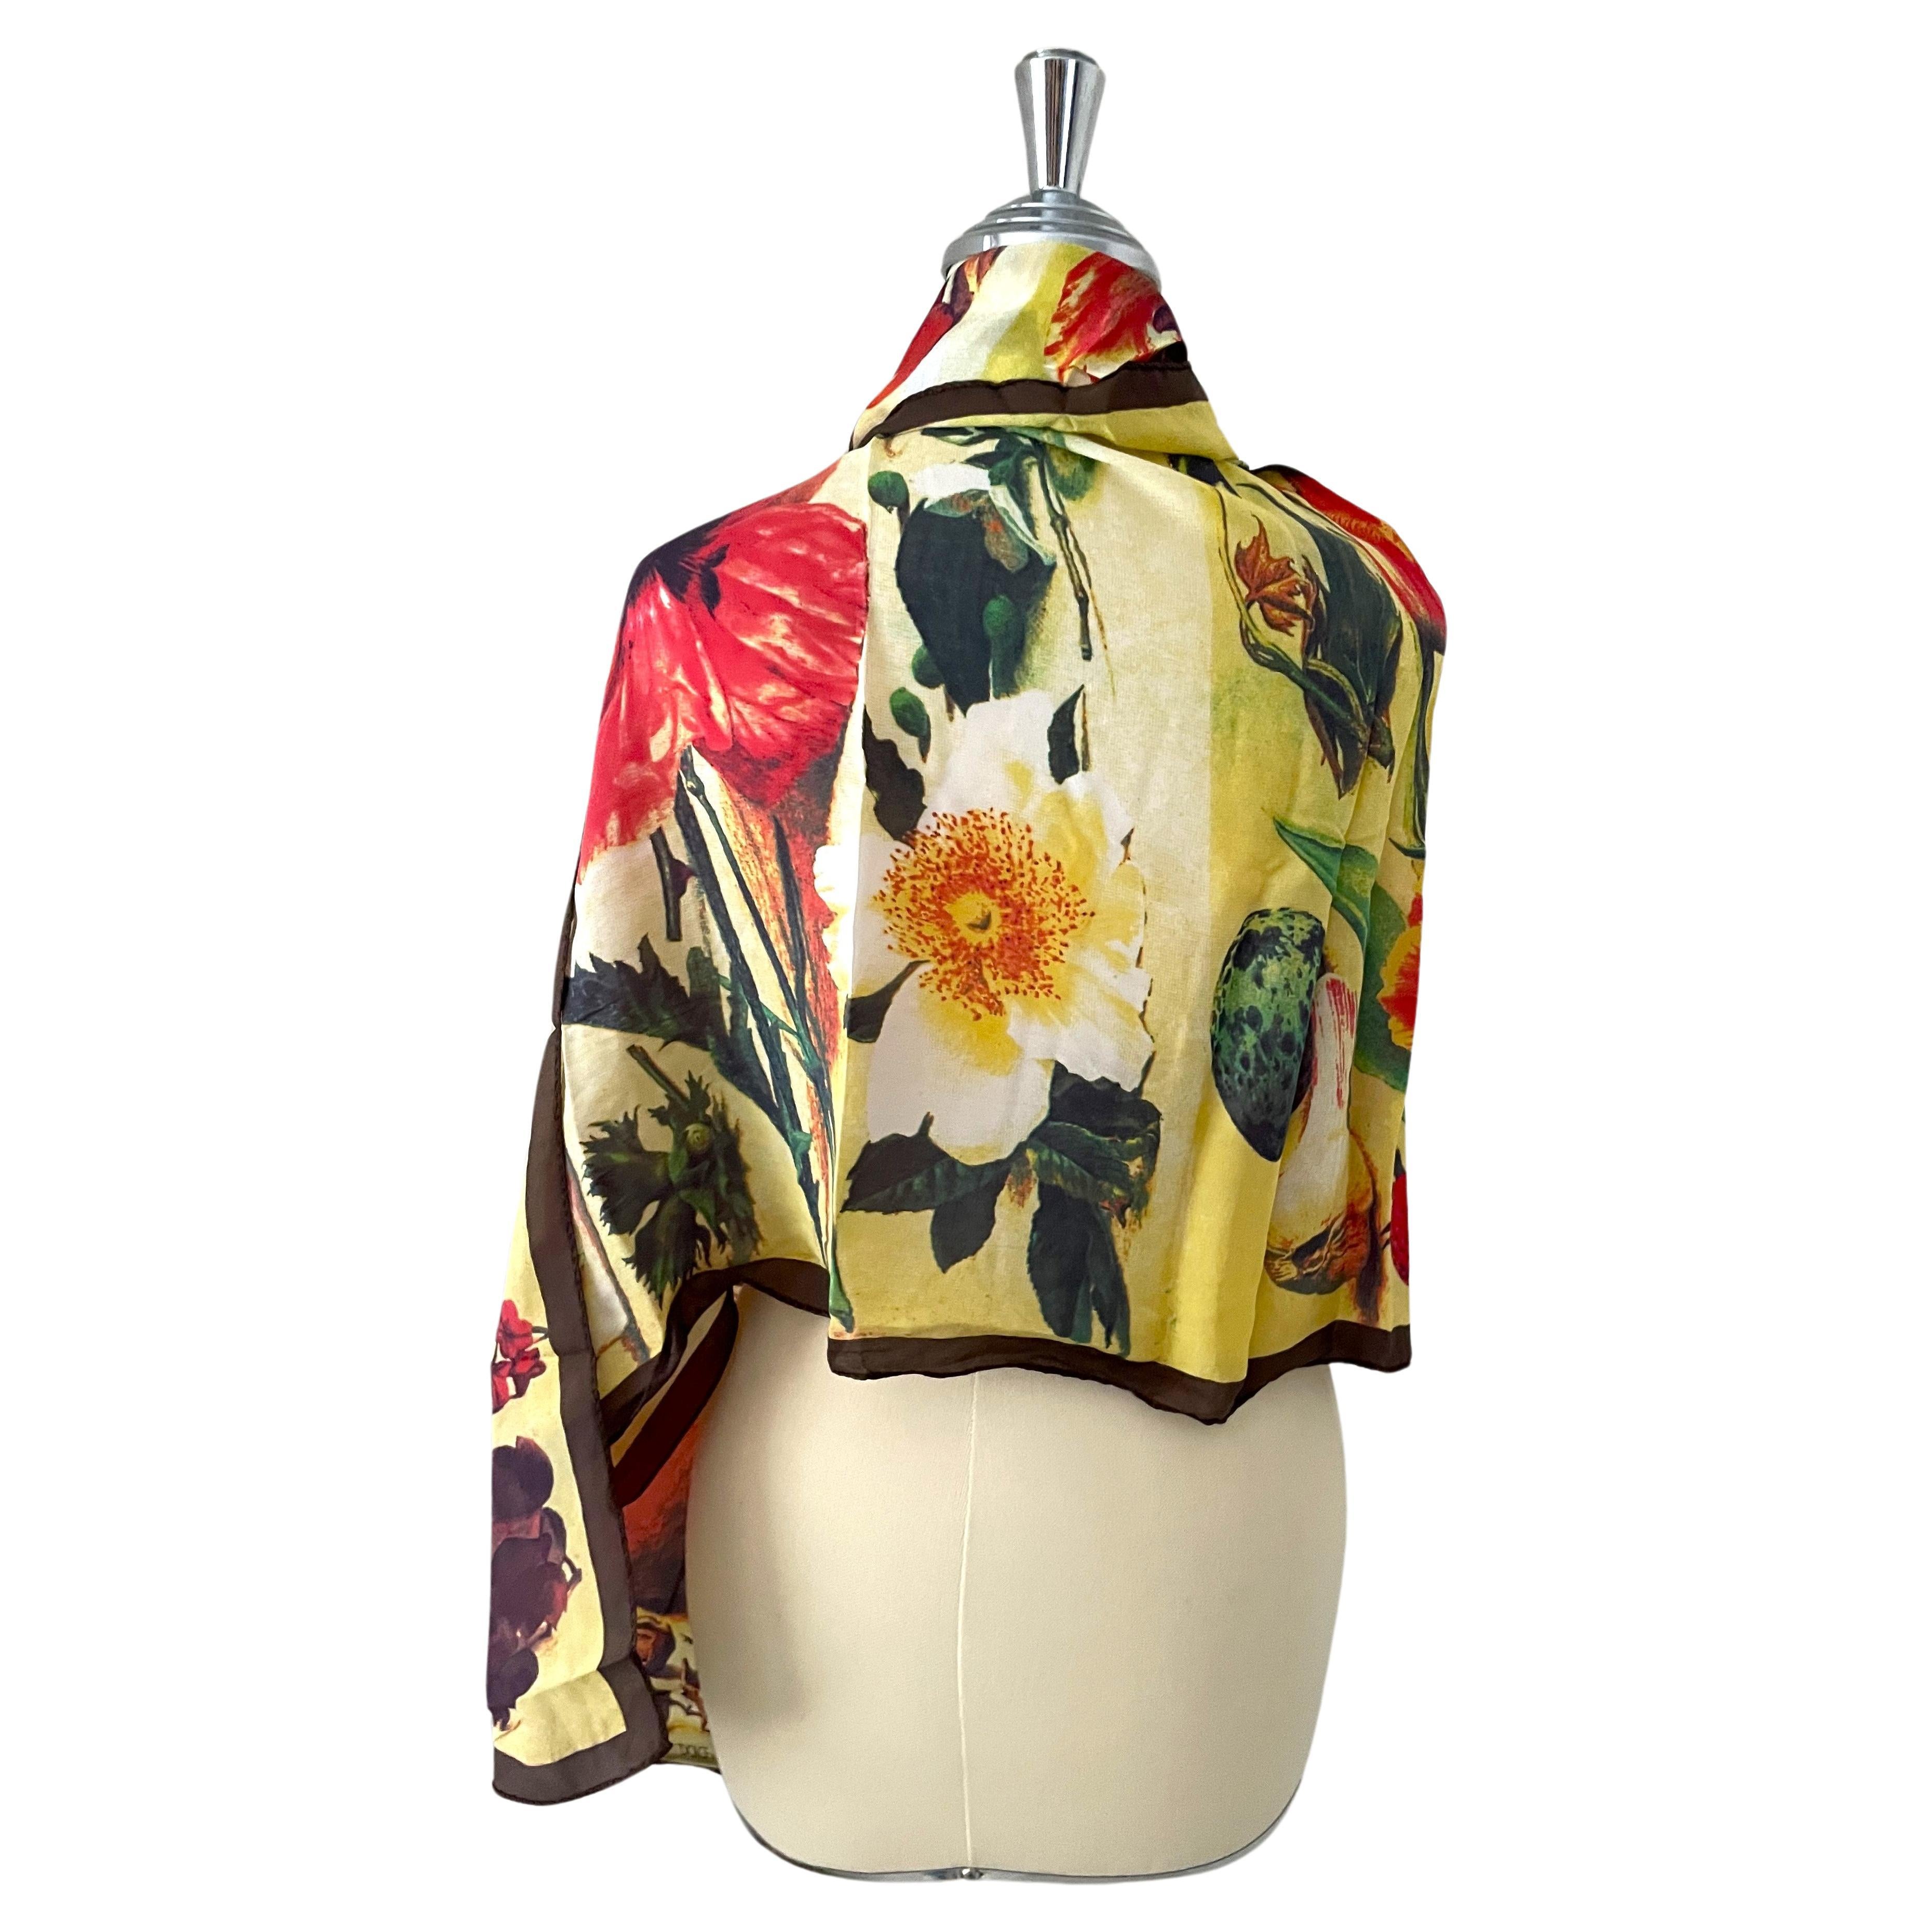 Rare 90s Vintage floral scarf foulard  Dolce Gabanna.
100% silk.  Made in Italy. Multicolored. Floral pattern, fruits, vegetables. Excellent condition.